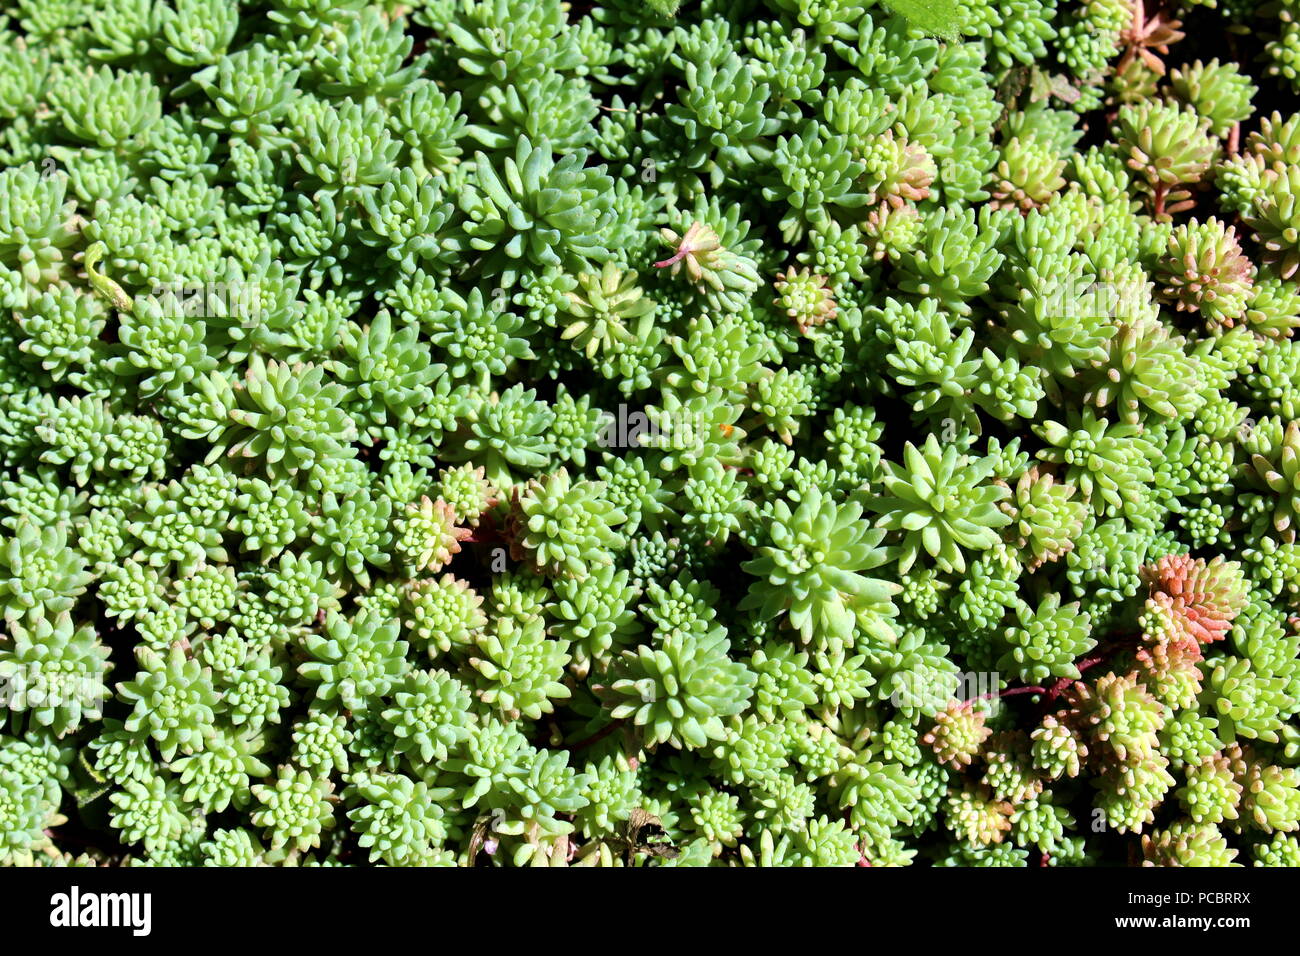 Sedum or Stonecrop hardy succulent ground cover perennial green plant with thick, succulent leaves, fleshy stems and clusters of star-shaped flowers g Stock Photo